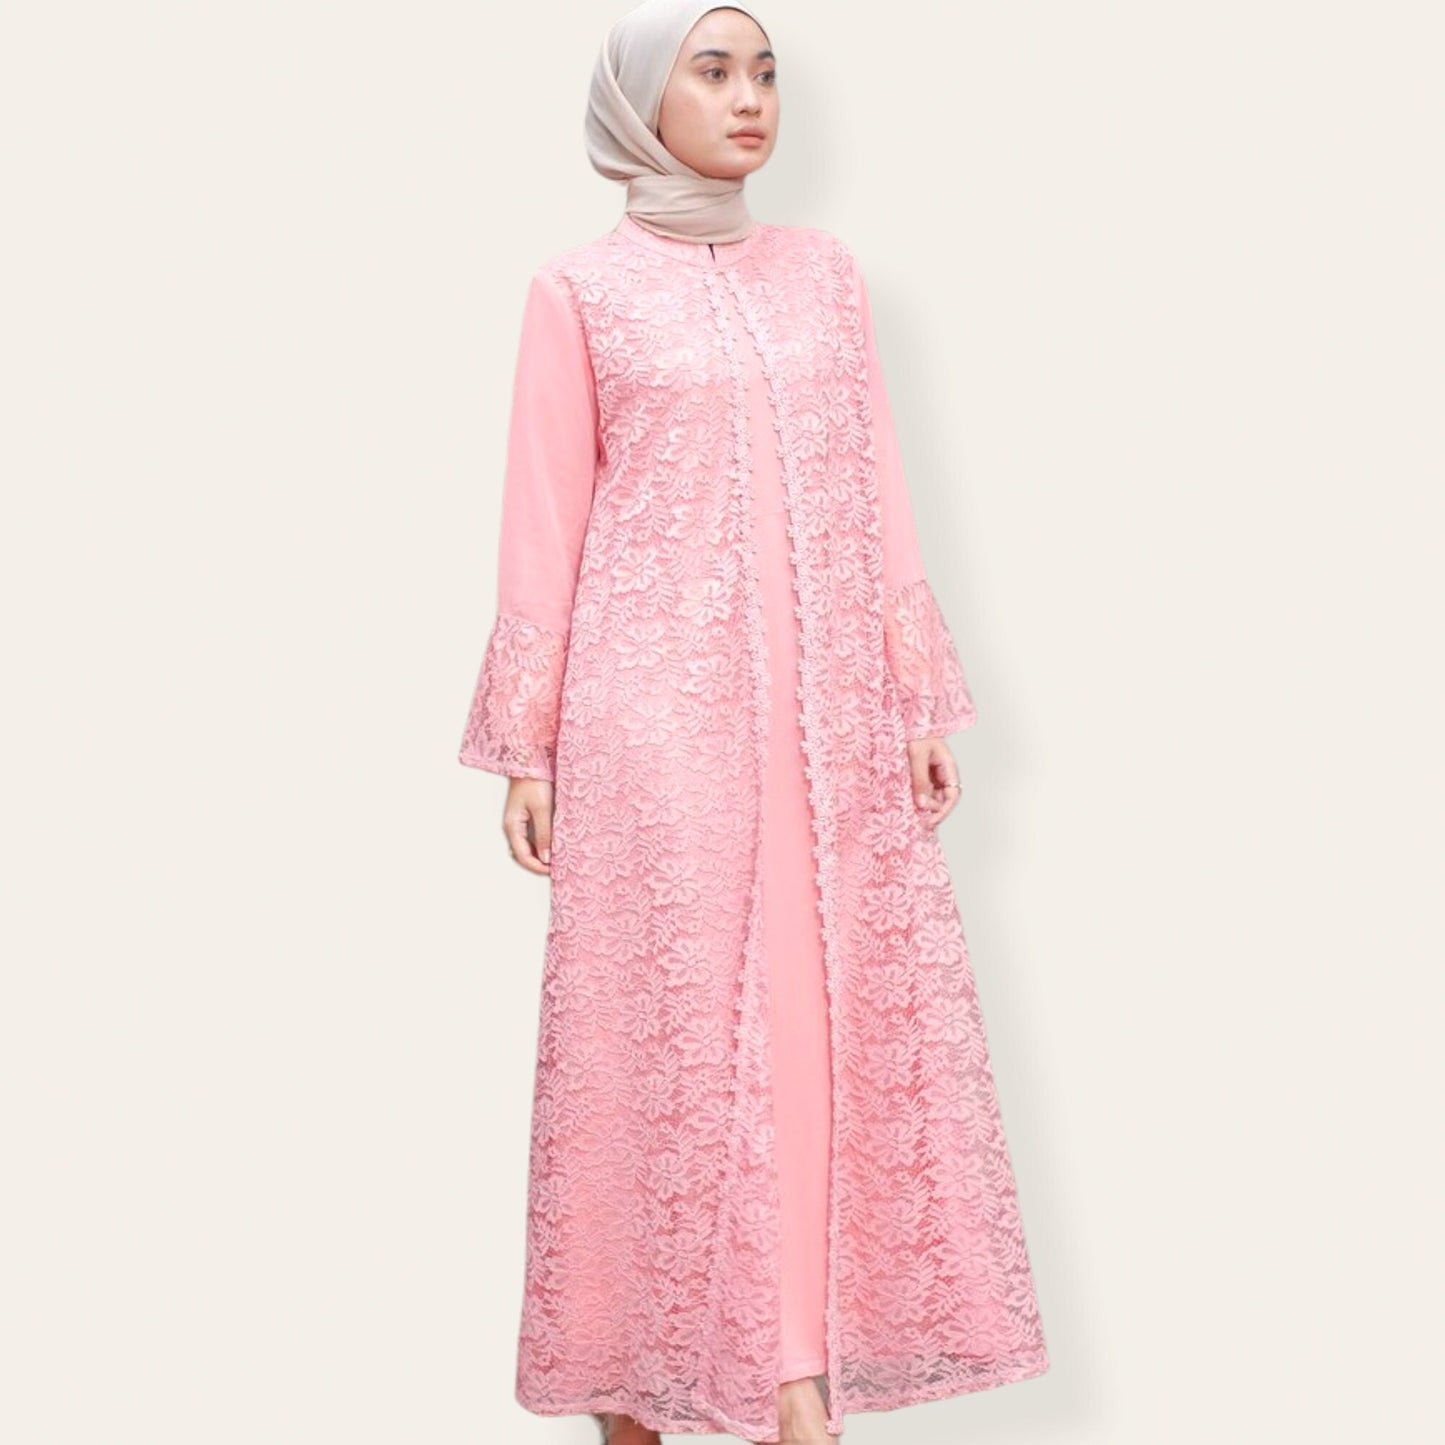 Pink abaya dress with brocade feature on top and zipper at back